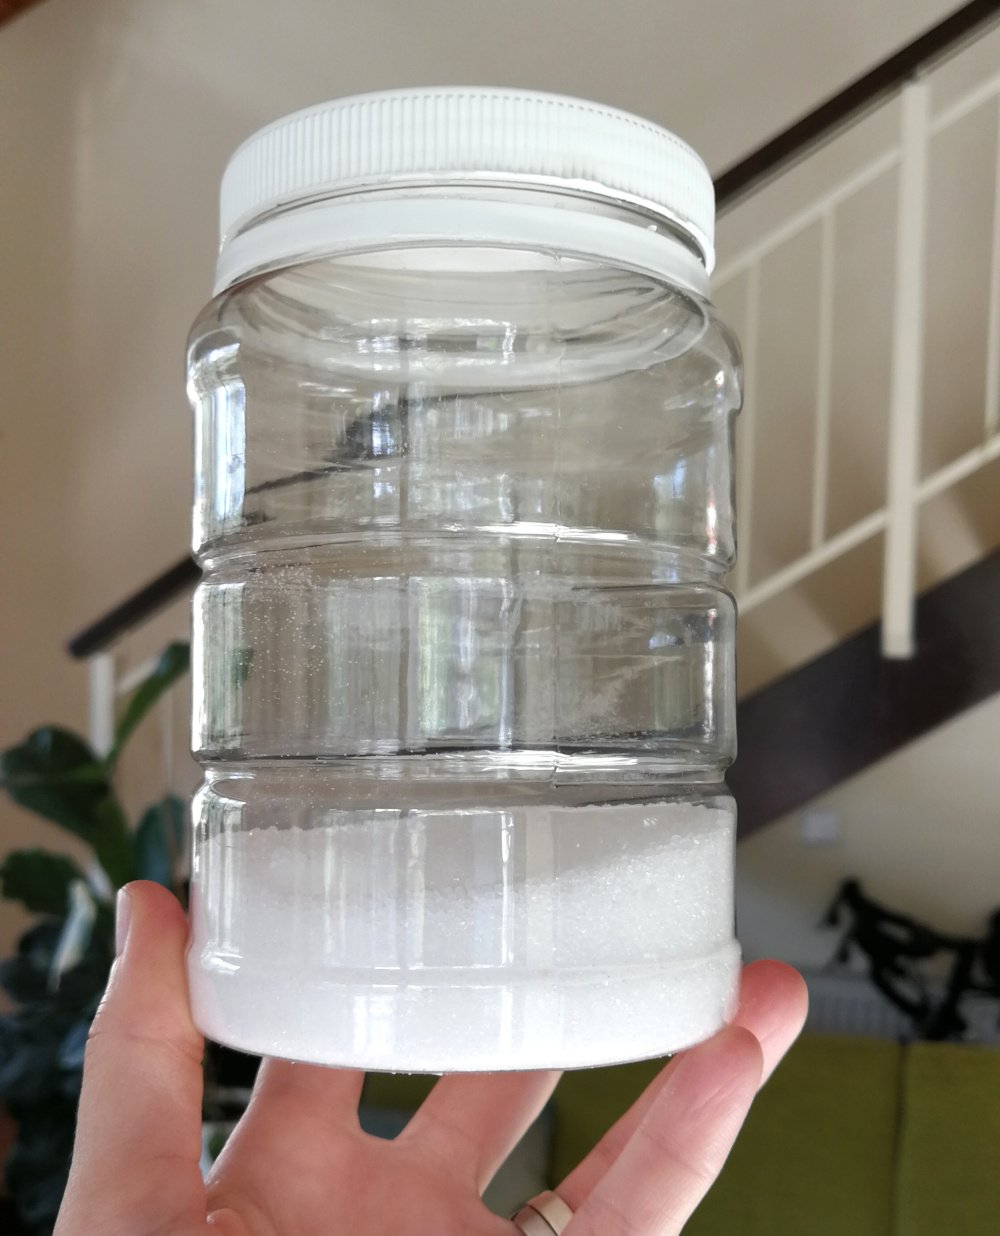 A left hand is holding up a plastic container filled nearly 1/3 of the way up with citric acid. The container is clear and the lid and the contents are bright white. The background is a staircase and some houseplants.